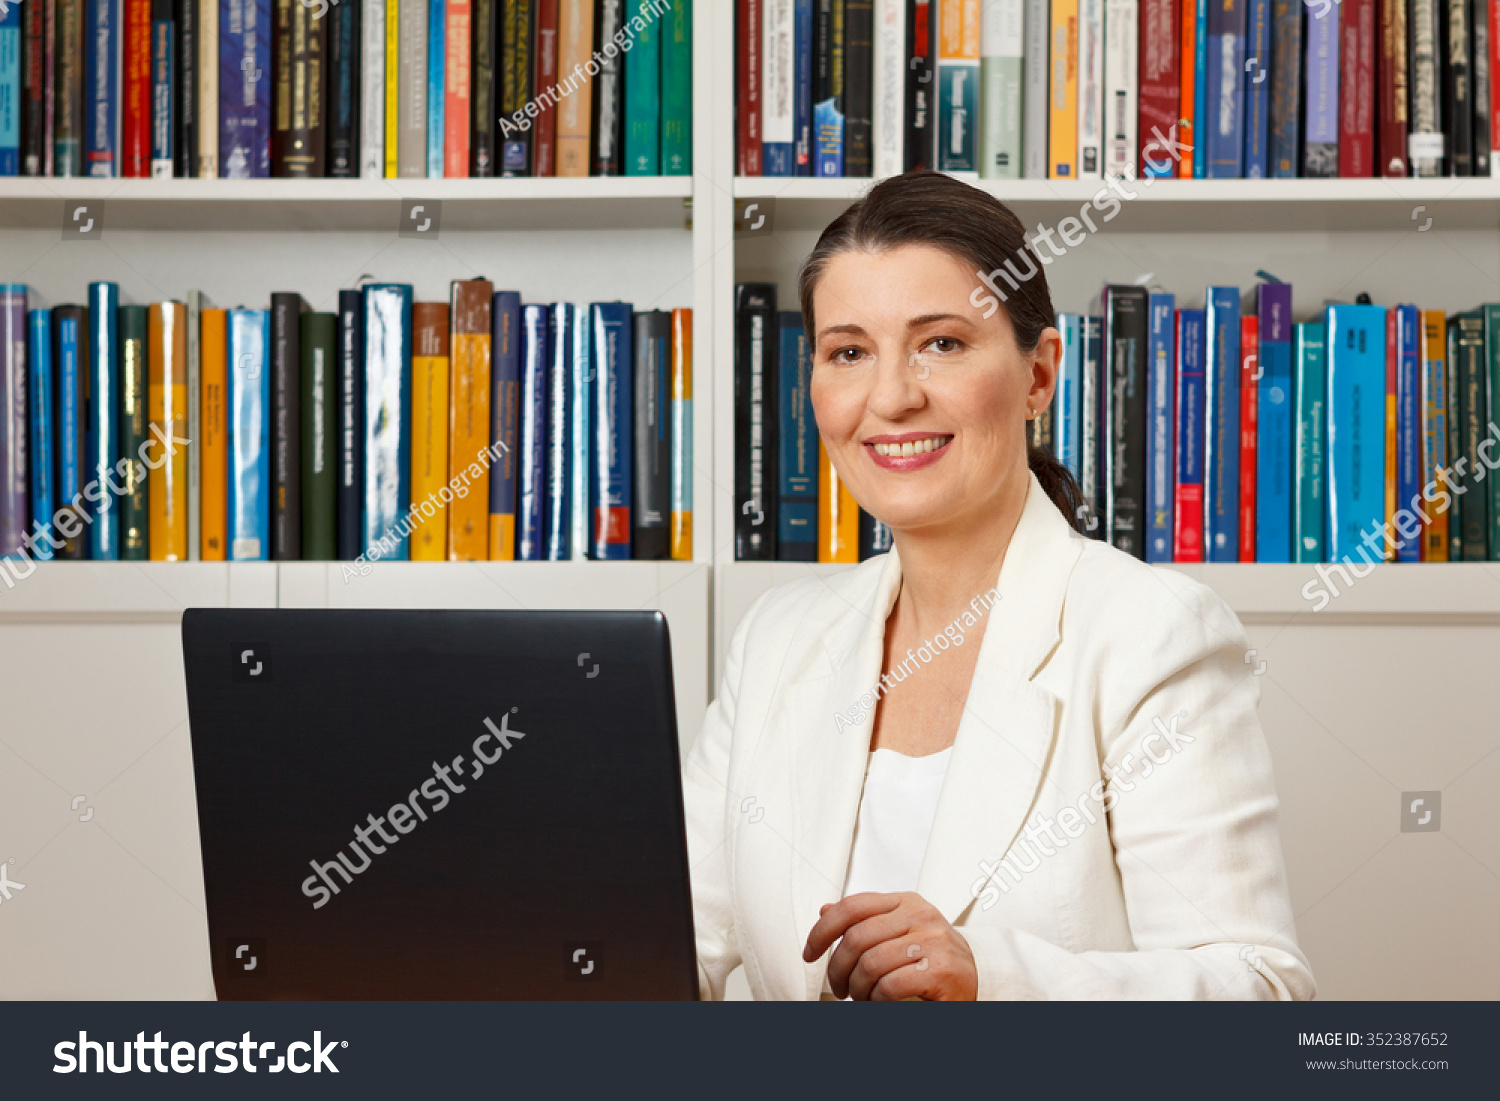 Friendly smiling woman in front of a computer in a library, consultant, counselor, adviser, customer service, online helpline #352387652